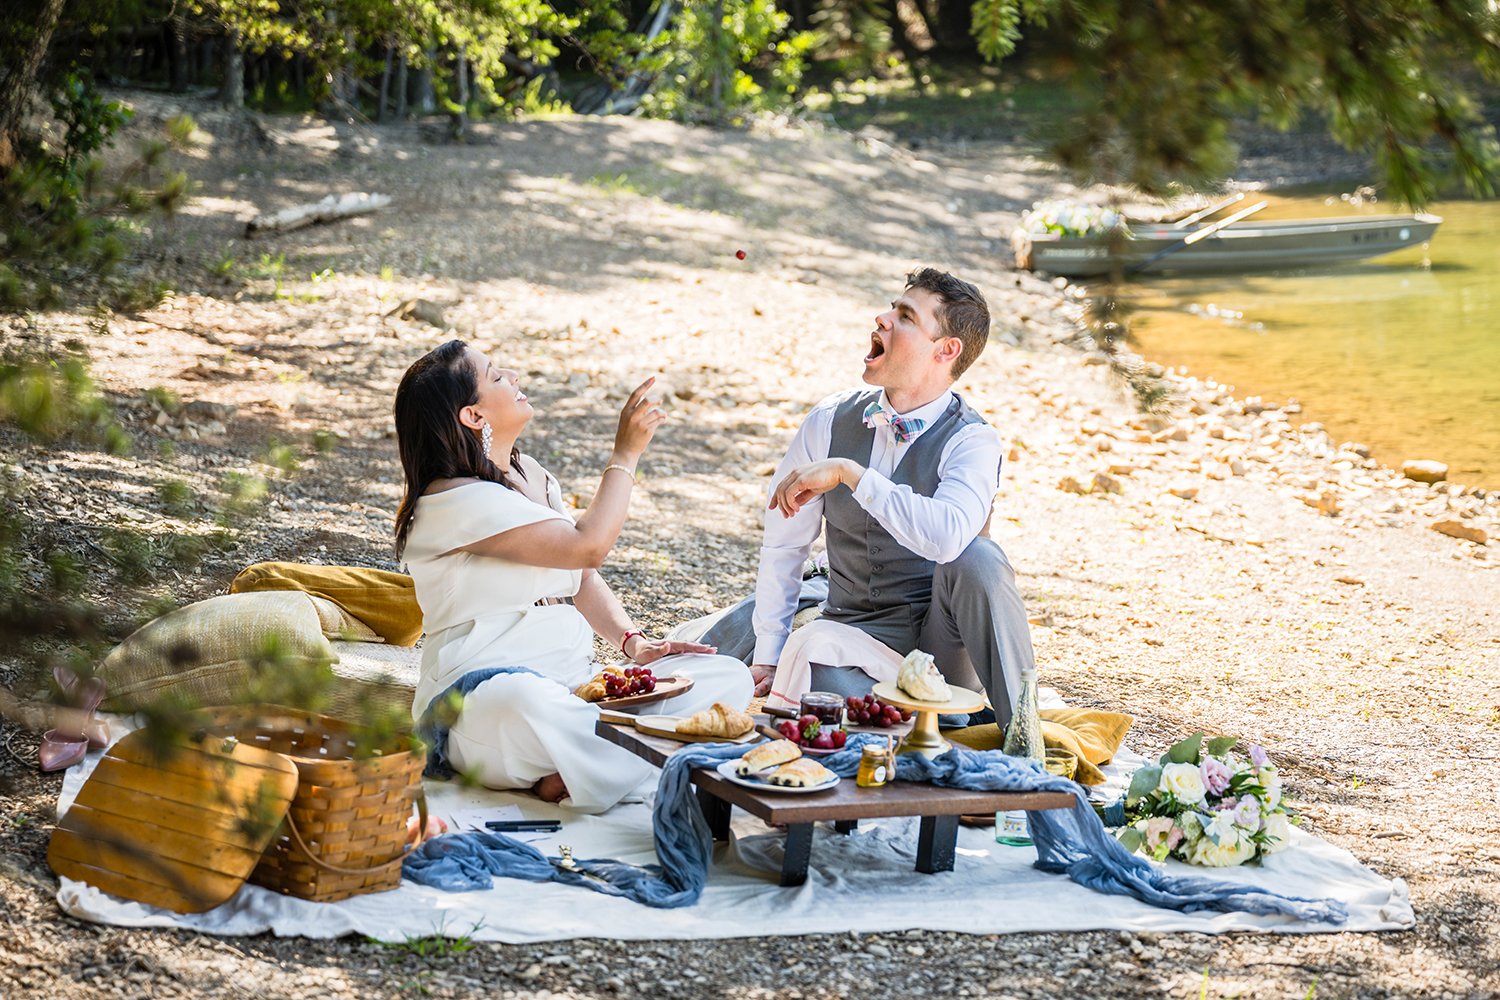 A bride throws a grape in the air as her groom attempts to catch it with his mouth wide open during their brunch picnic session of their elopement timeline.